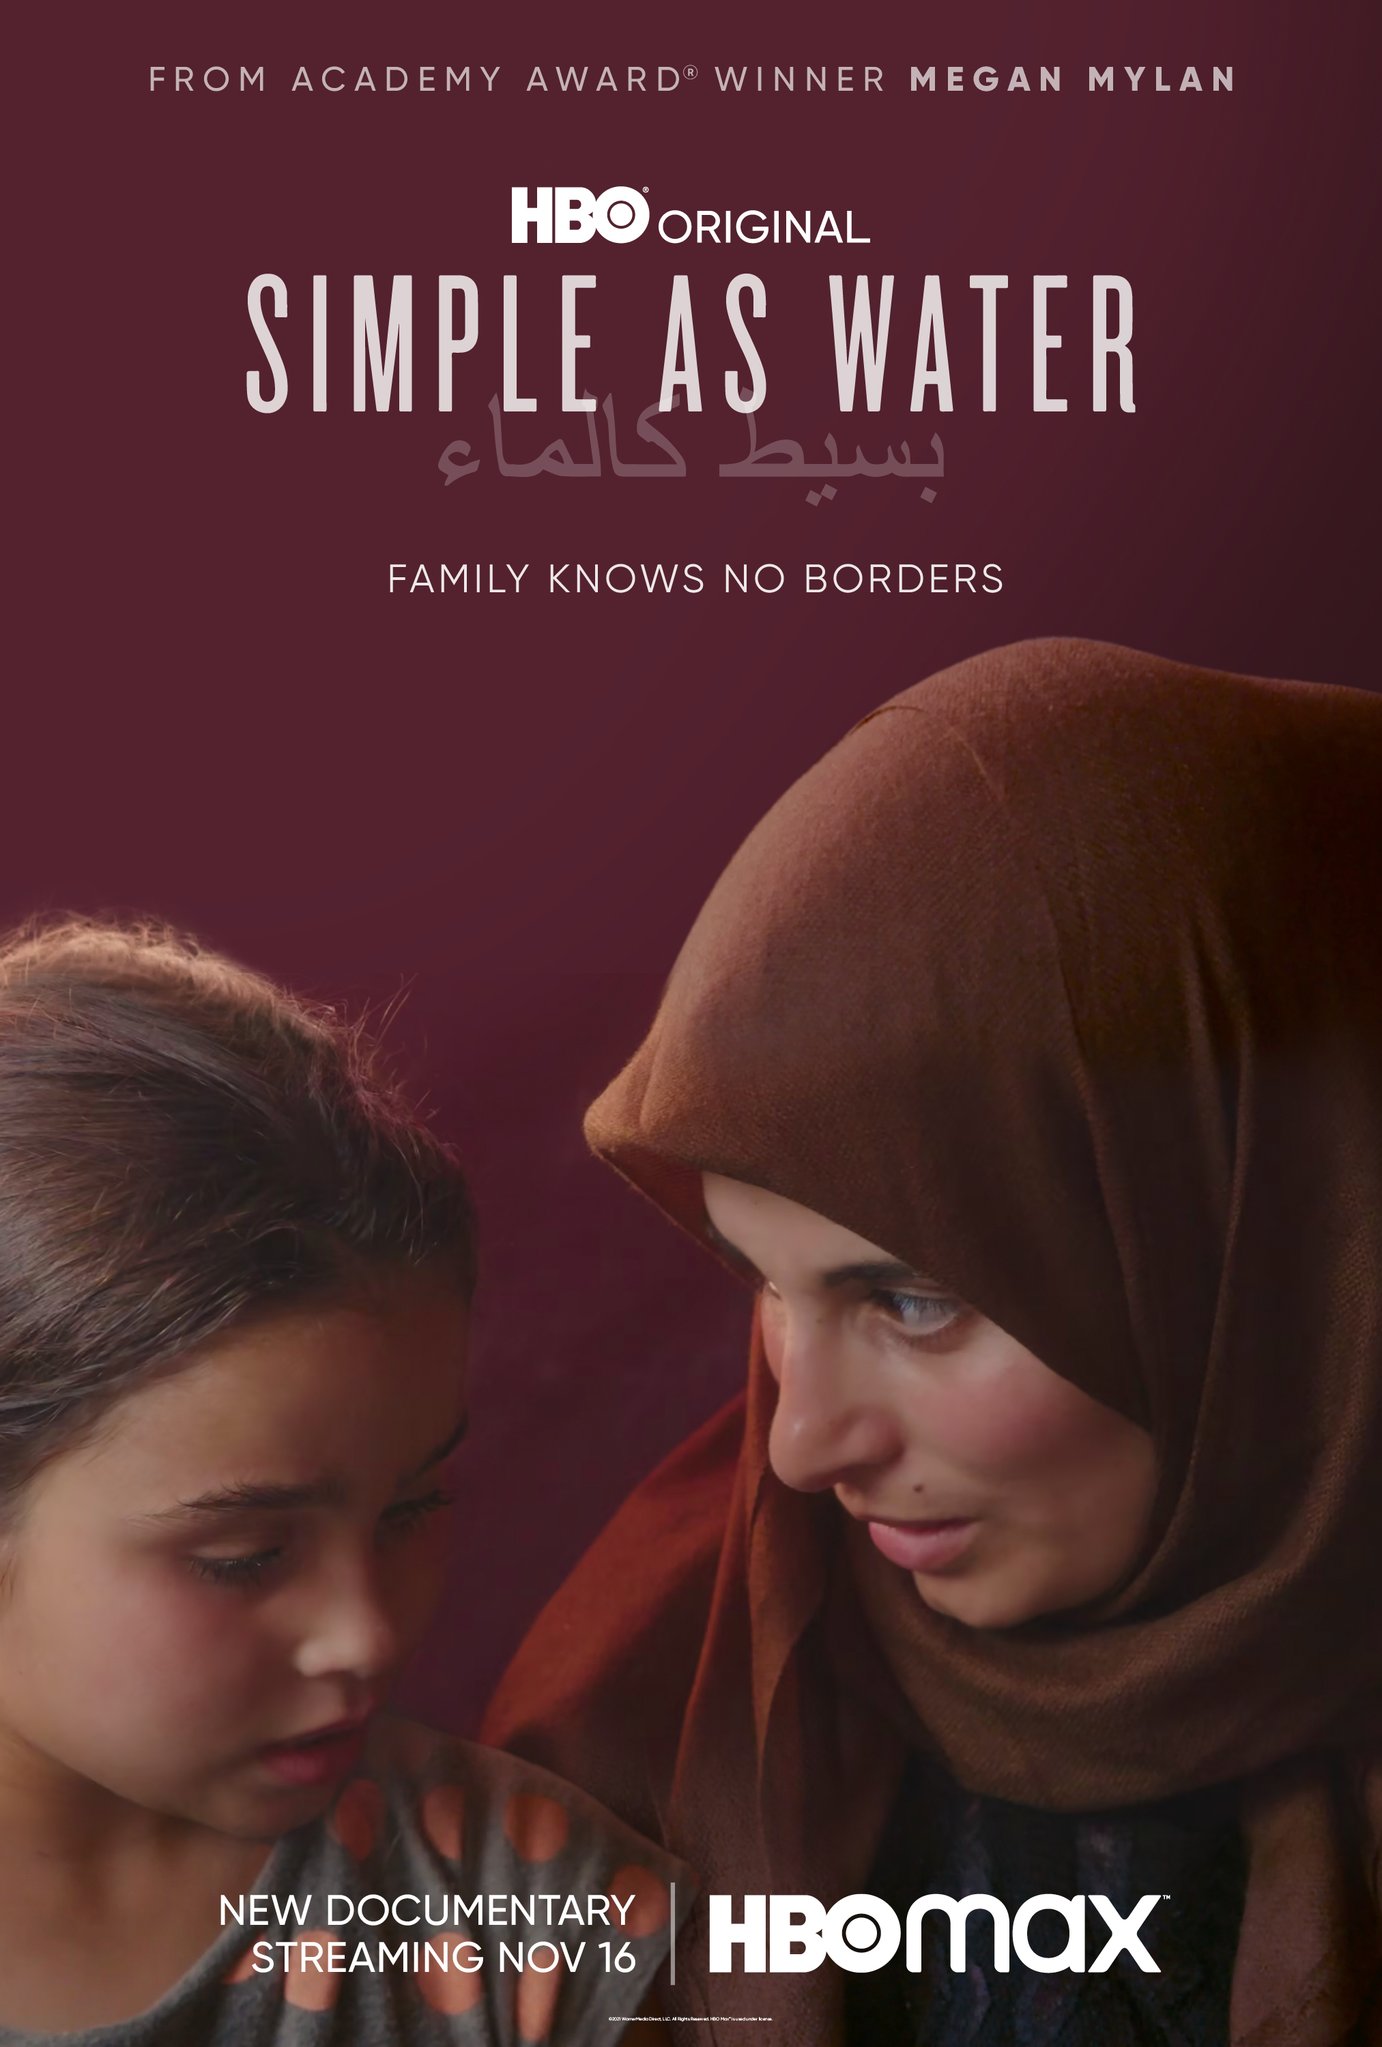 Is Simple as Water on HBO Max